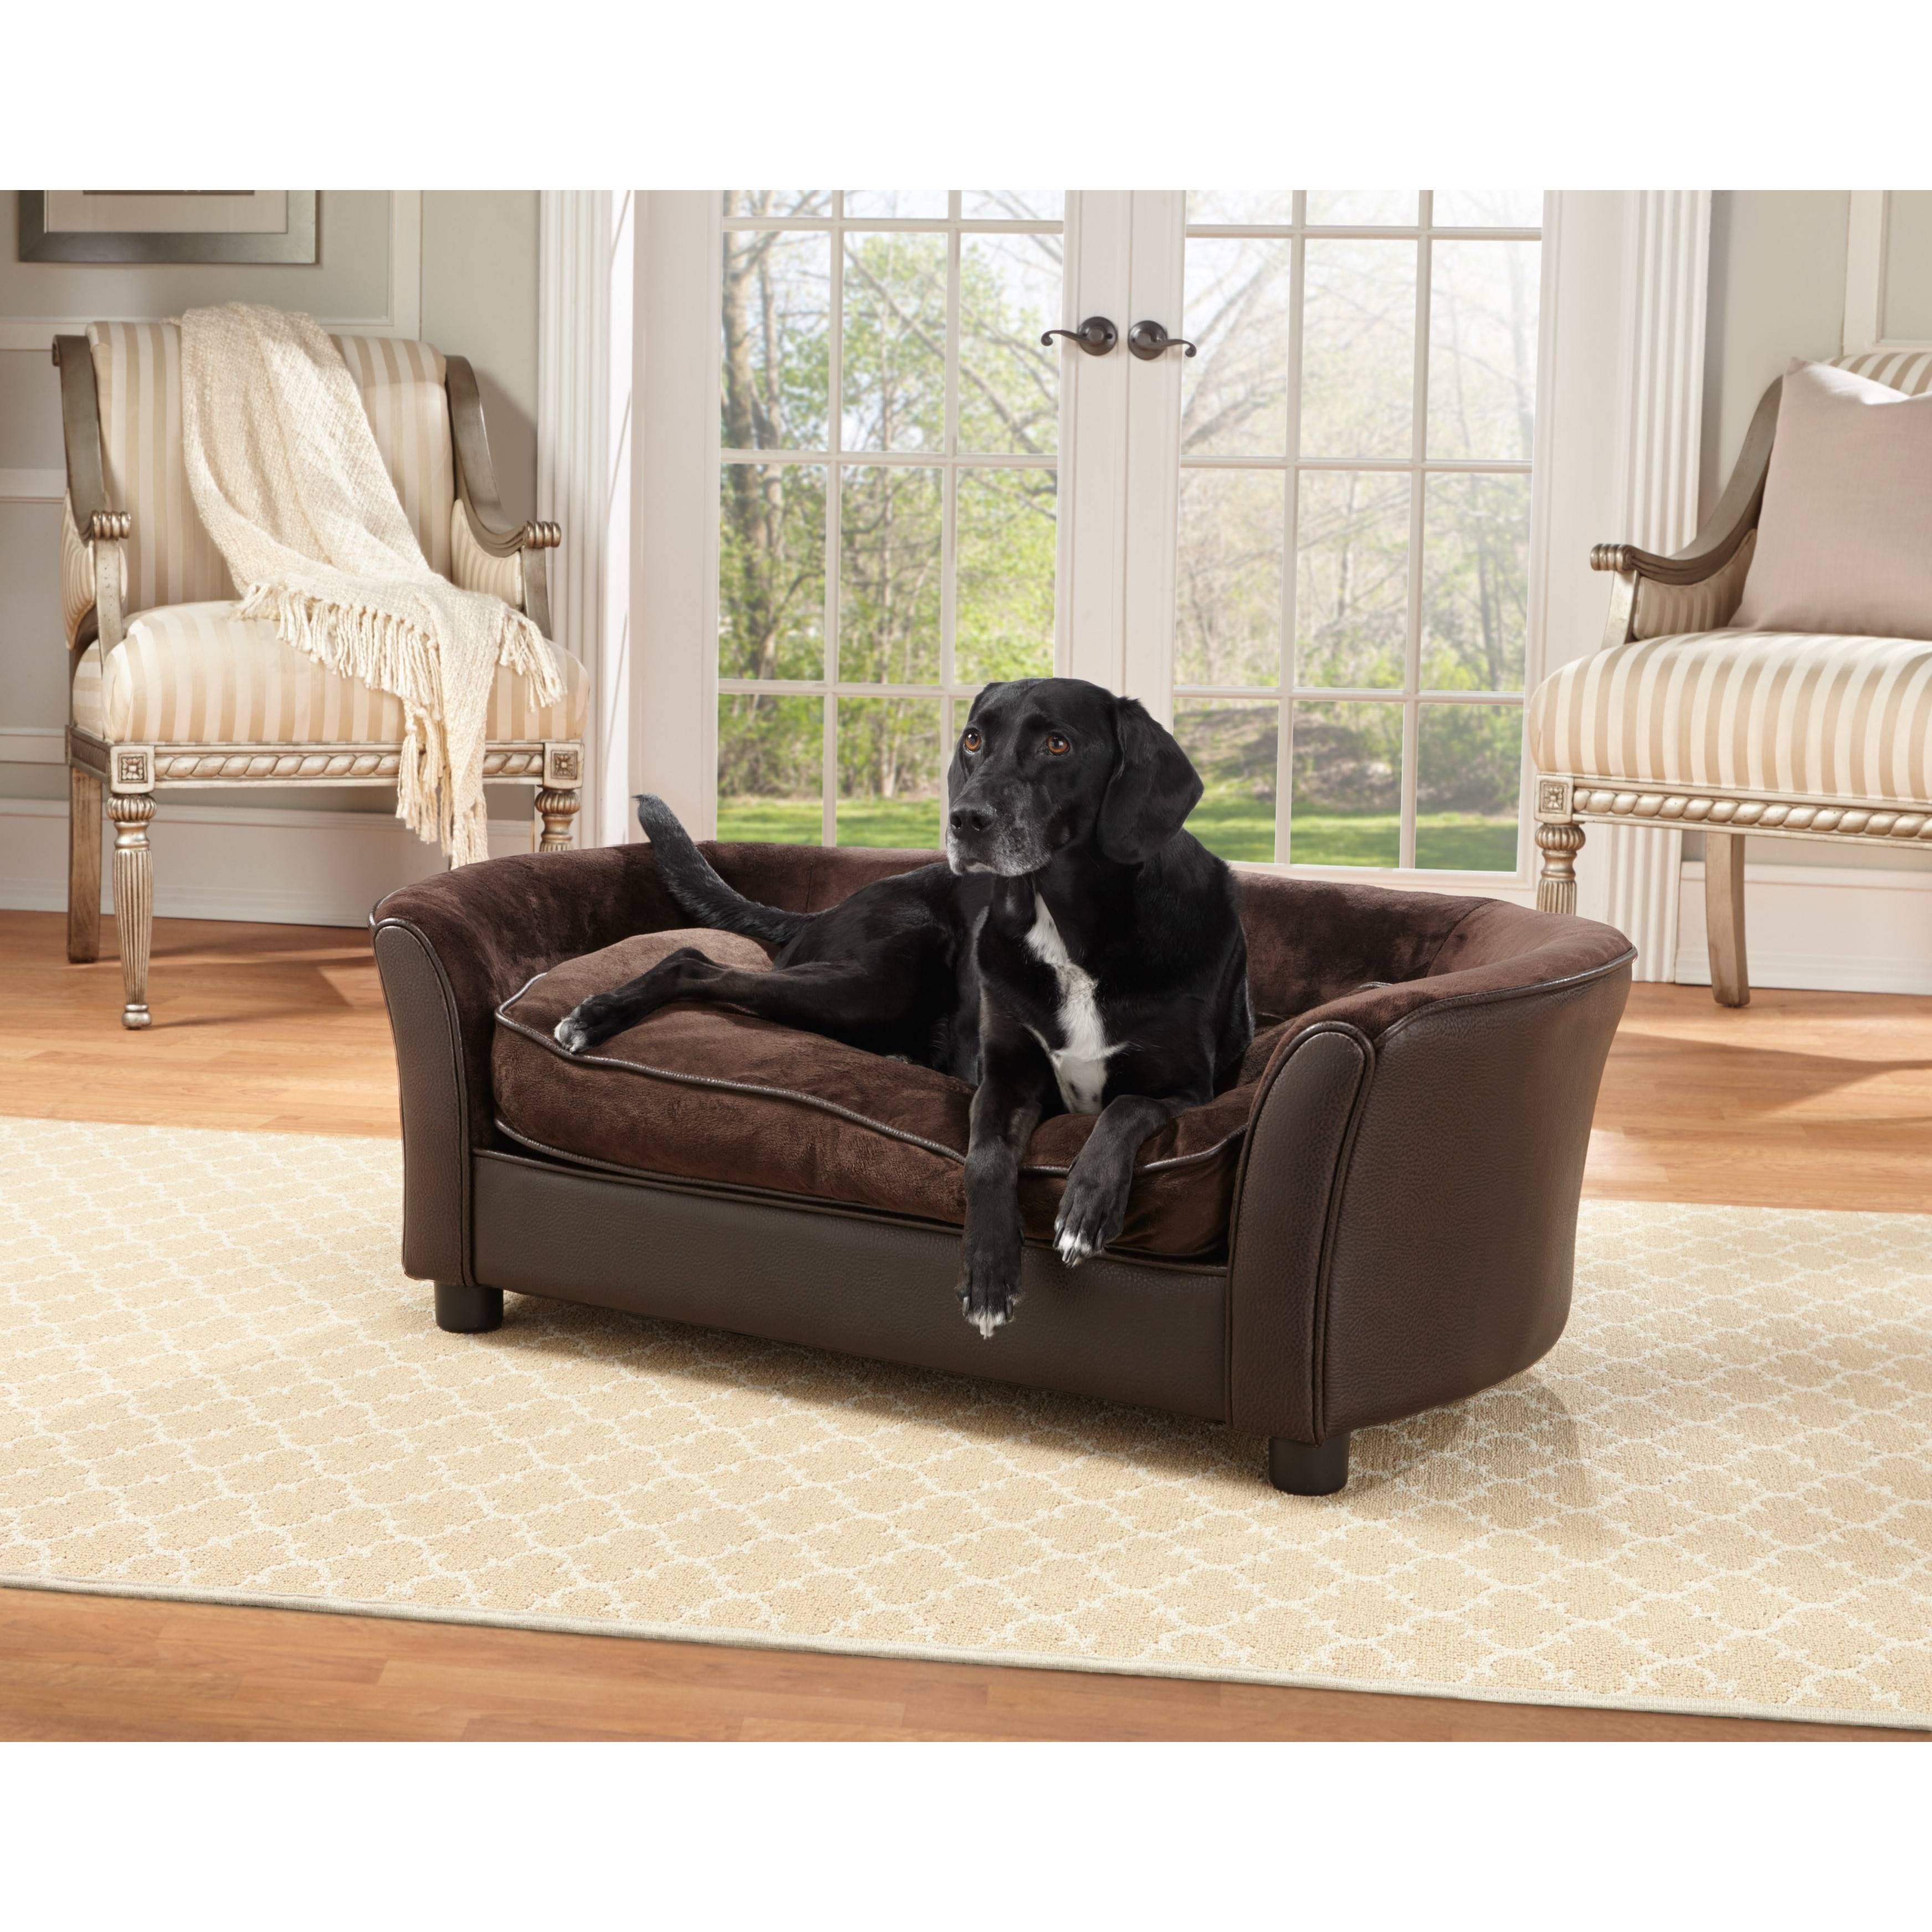 Enchanted Home Pet Brisbane Dog Bed Reviews Wayfair ~ Loversiq With Dog Sofas And Chairs (View 15 of 15)